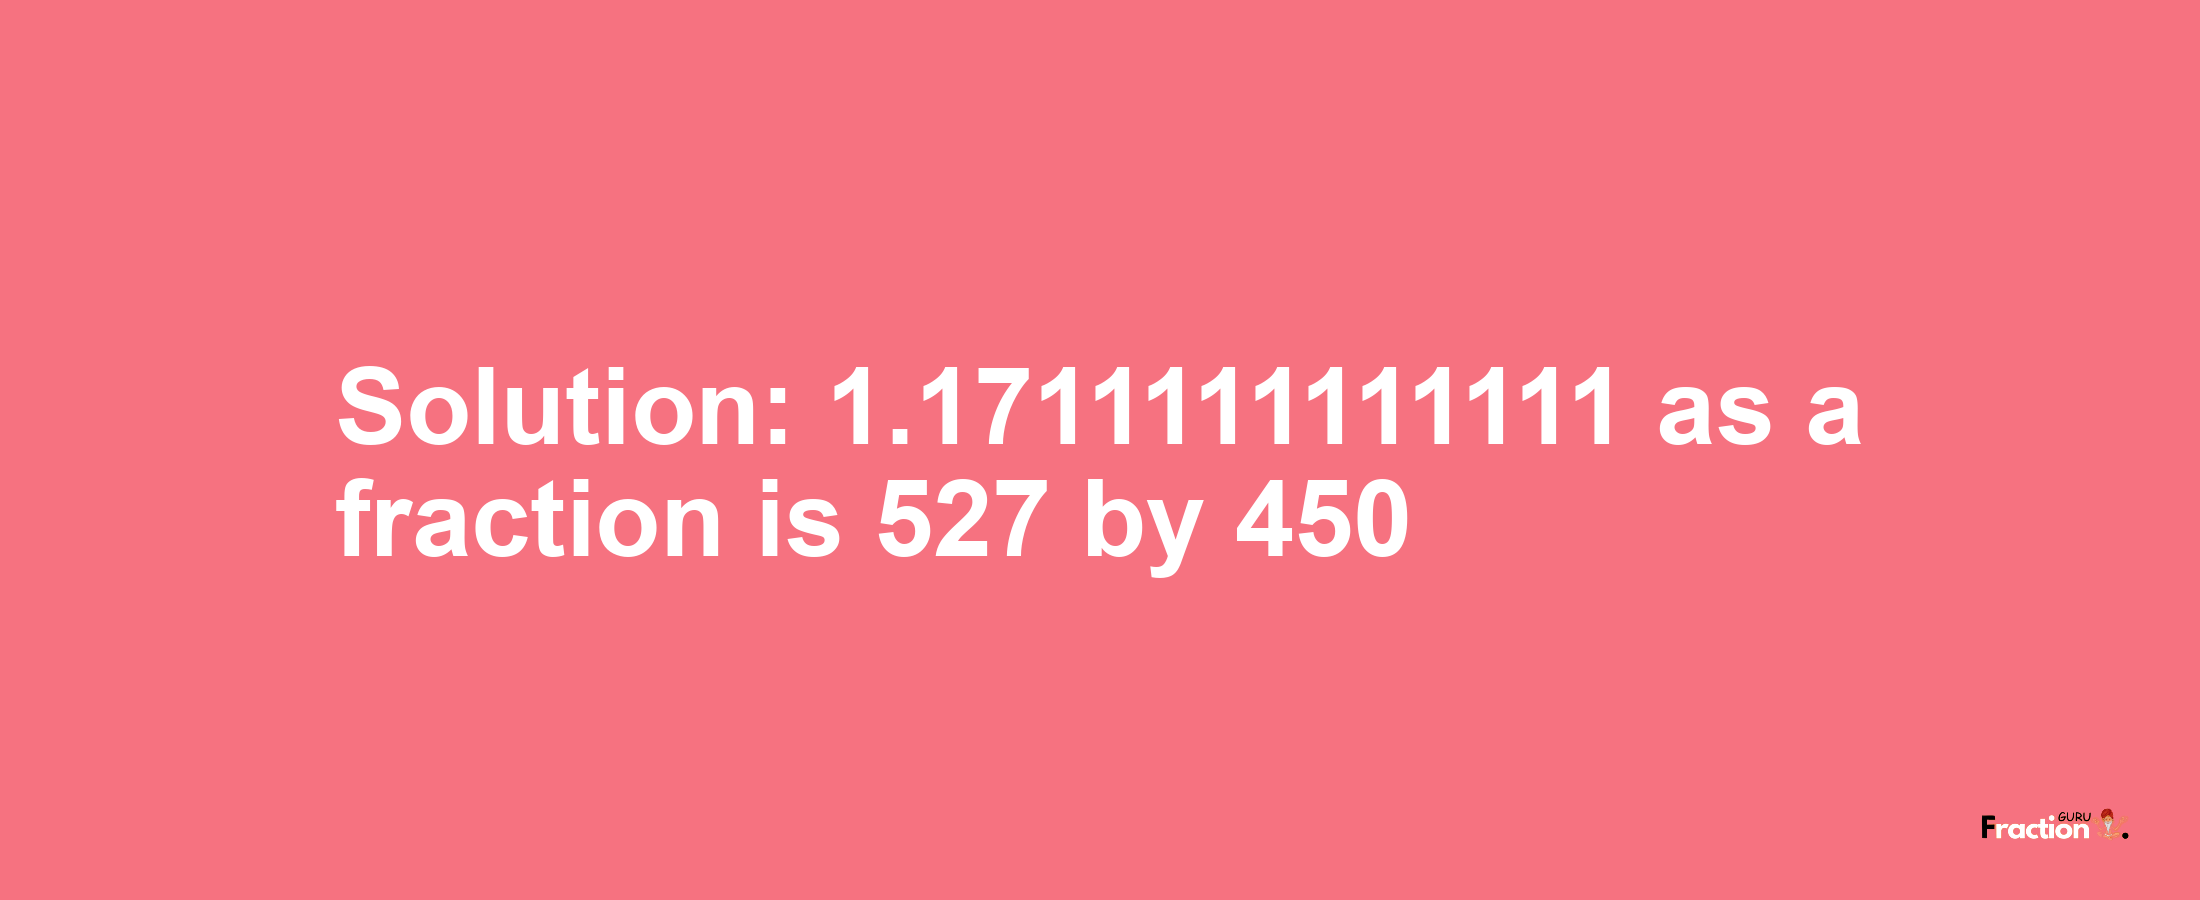 Solution:1.1711111111111 as a fraction is 527/450